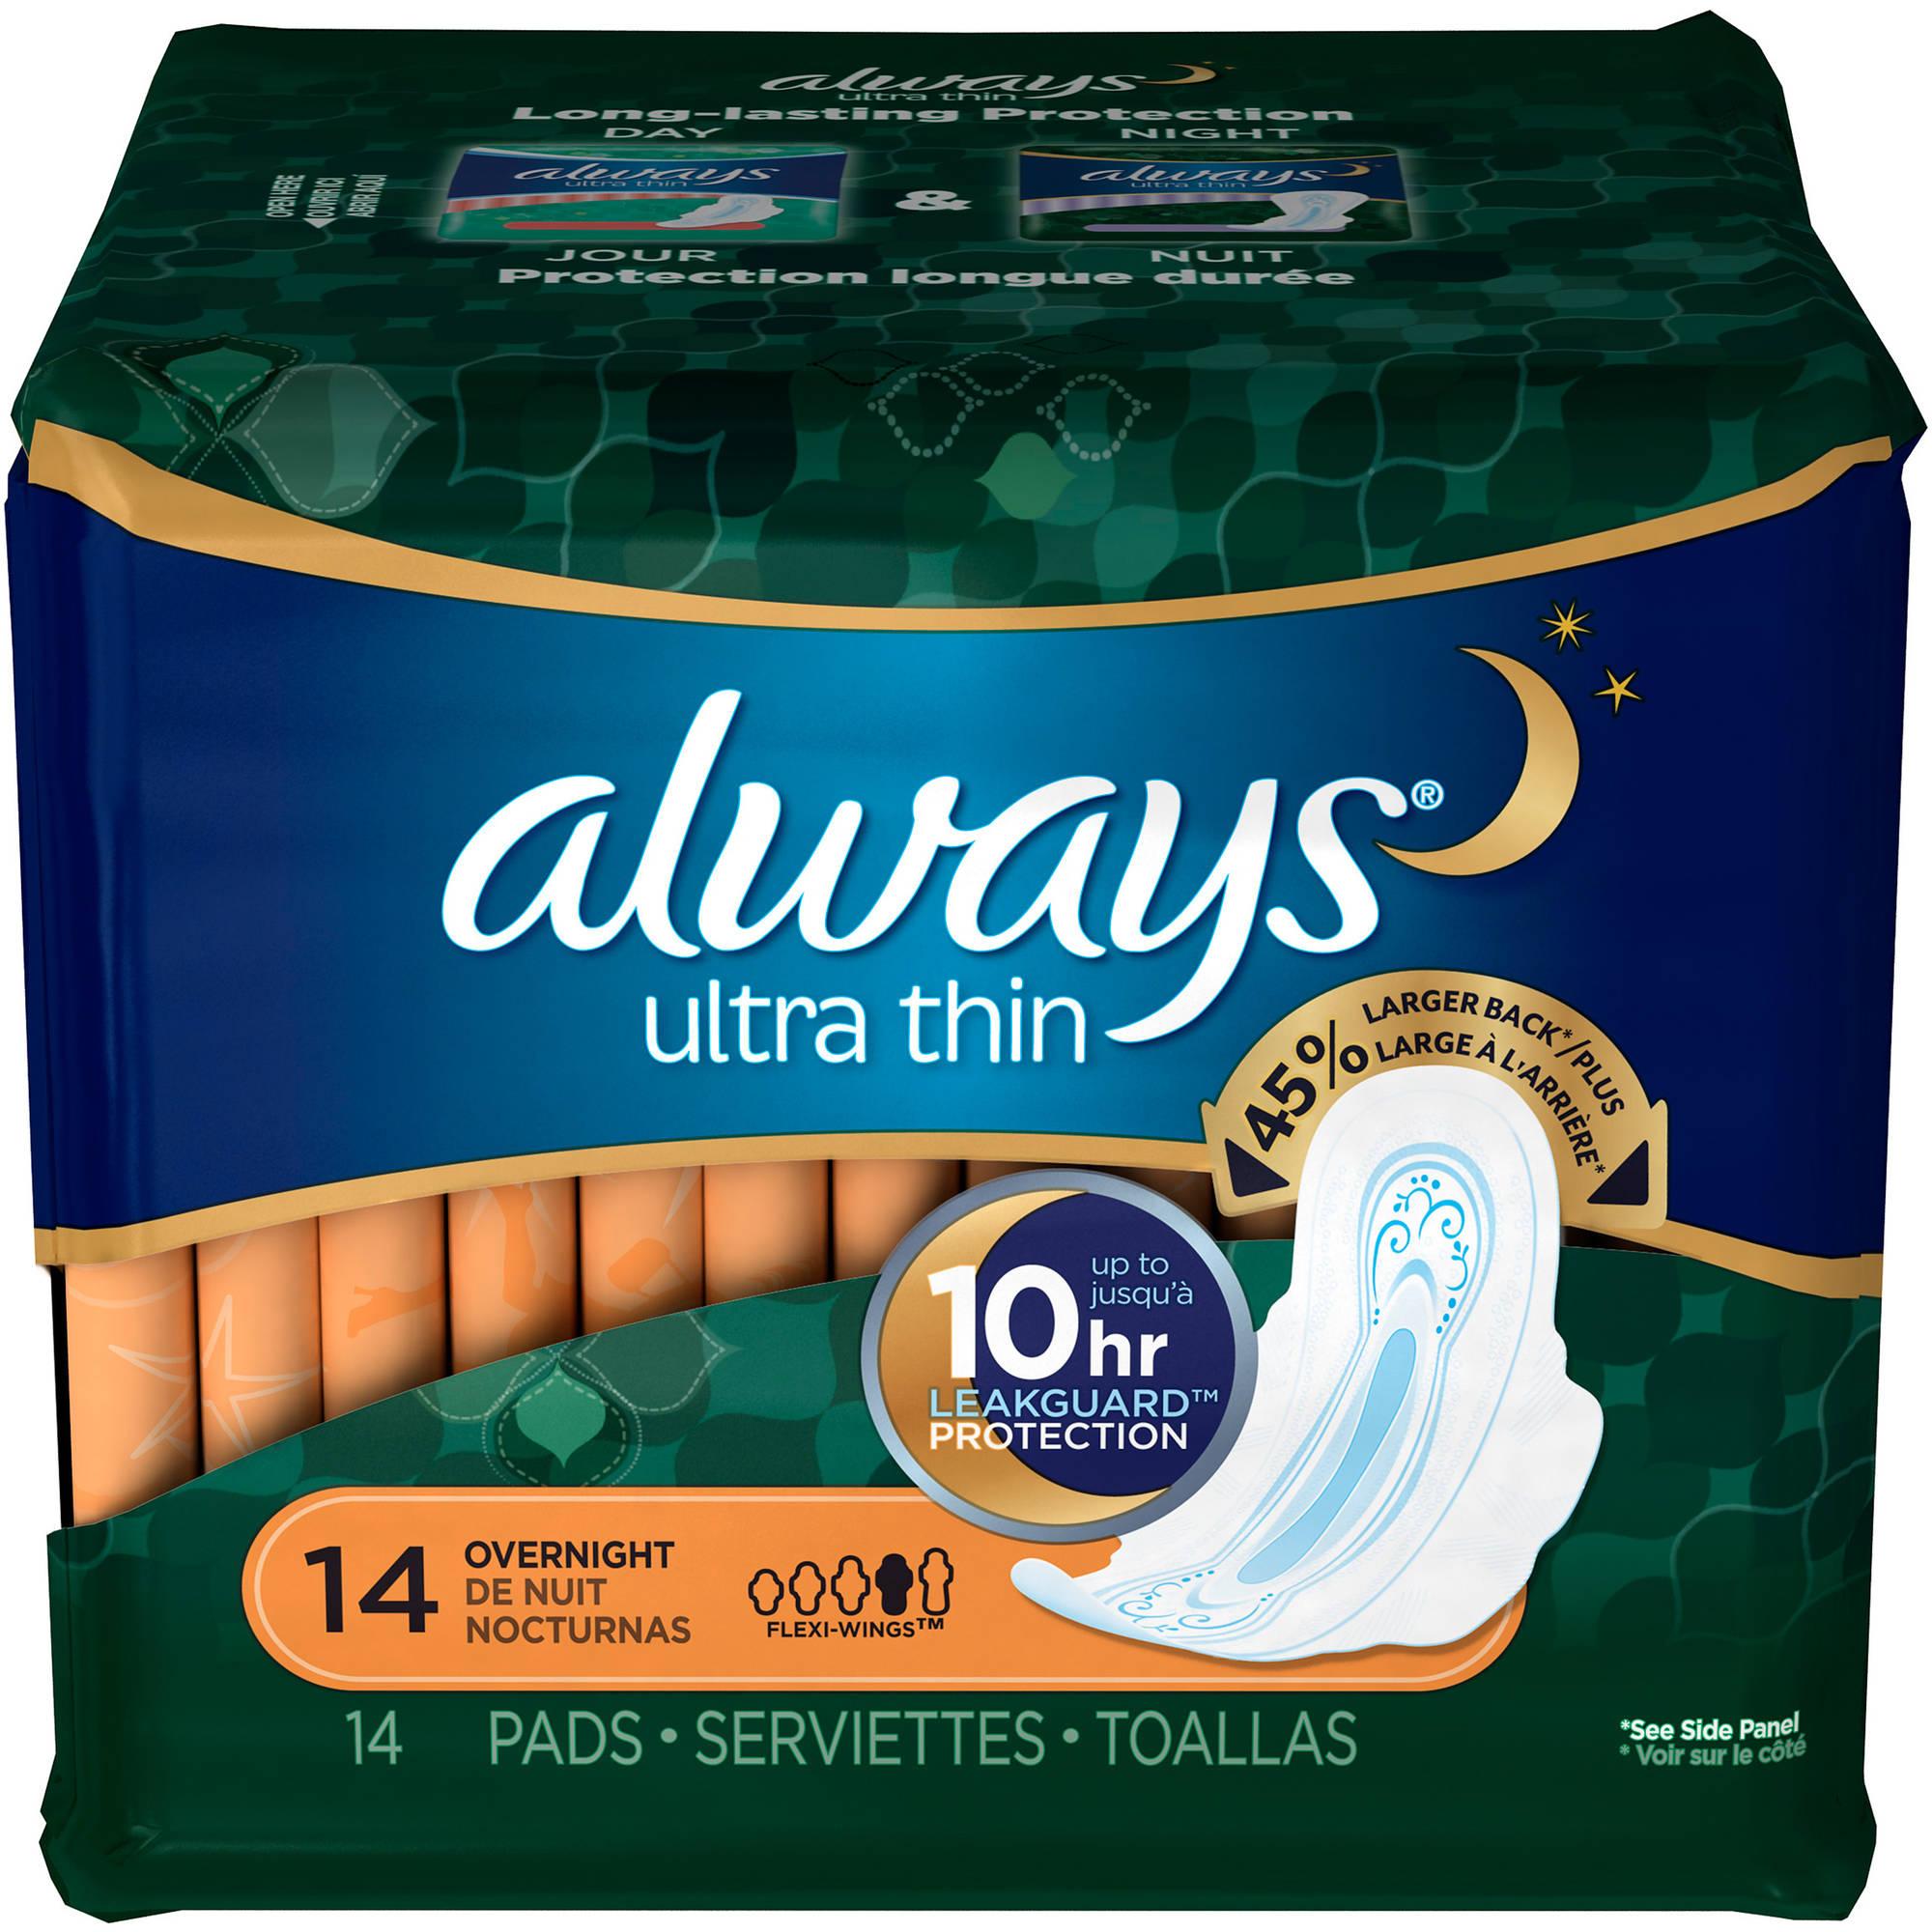 Always Ultra Thin 10 hr leakguard protection 14 count overnight 3.jpg  by BudgetGeneral